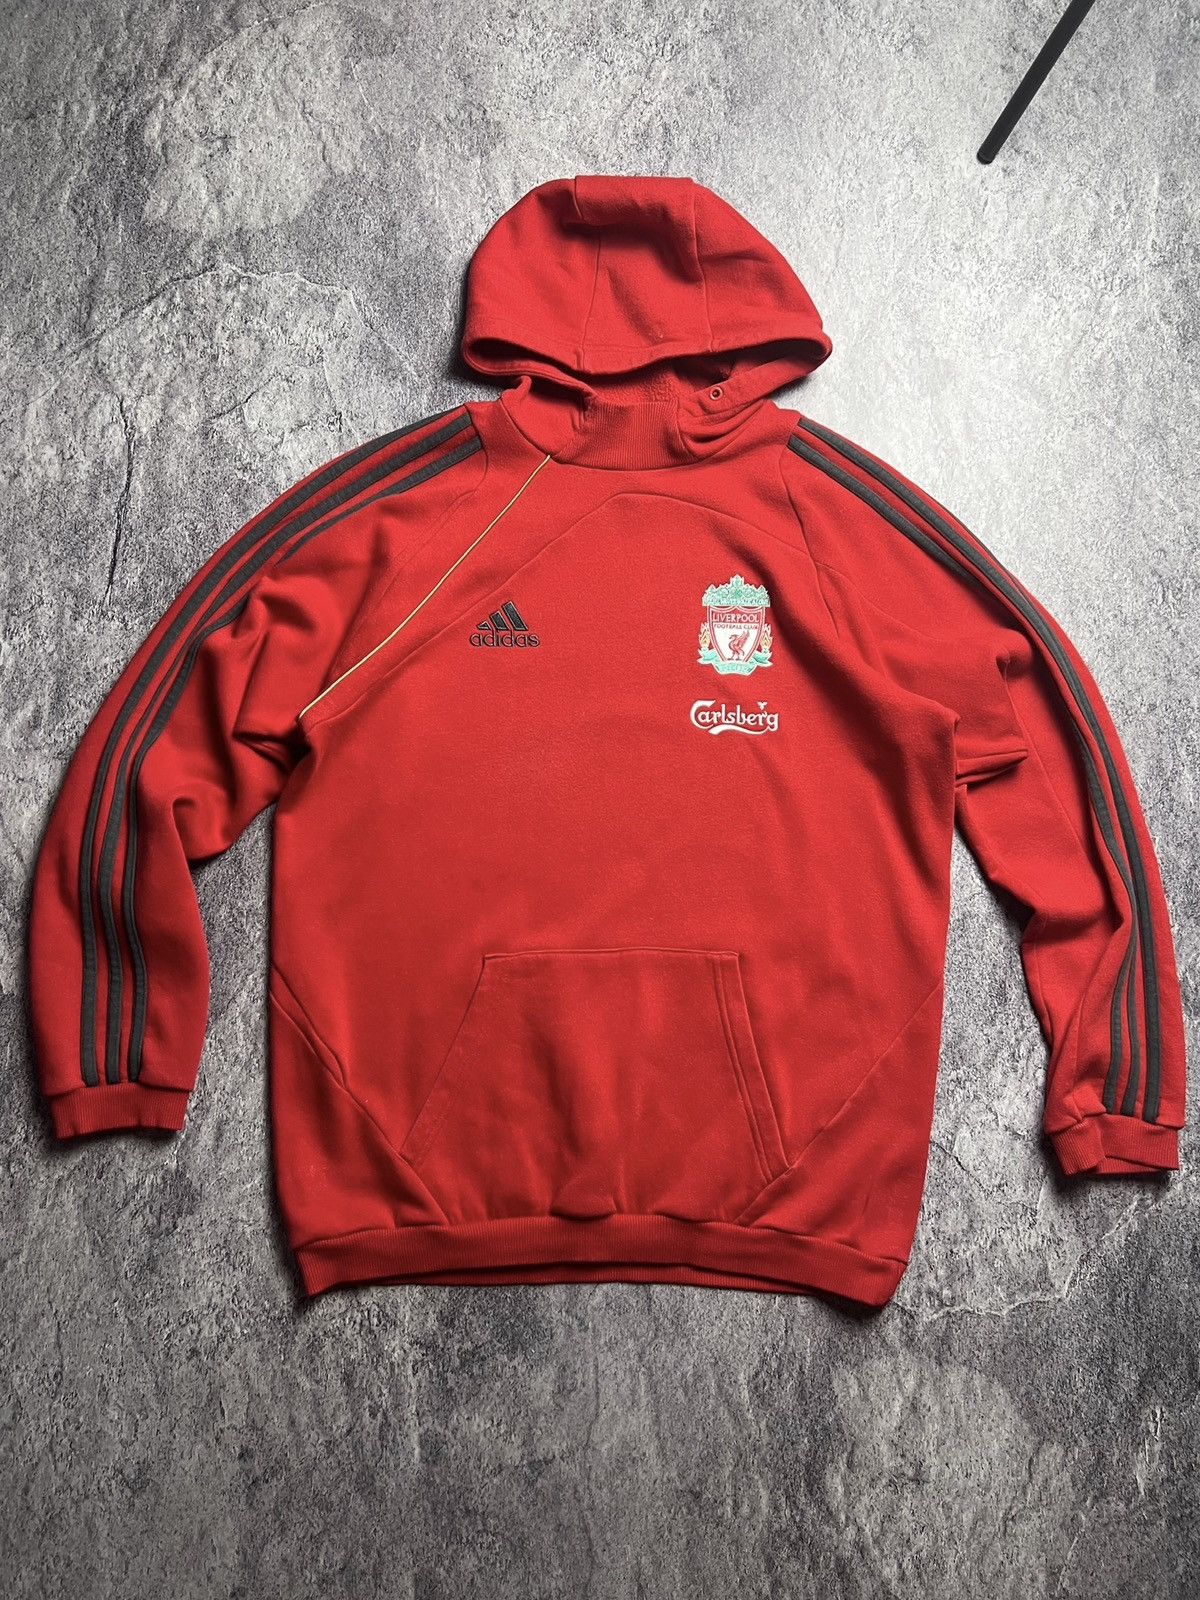 Pre-owned Adidas X Liverpool Adidas Liverpool Fc 2009 England Blokecore Style Hoodie In Red